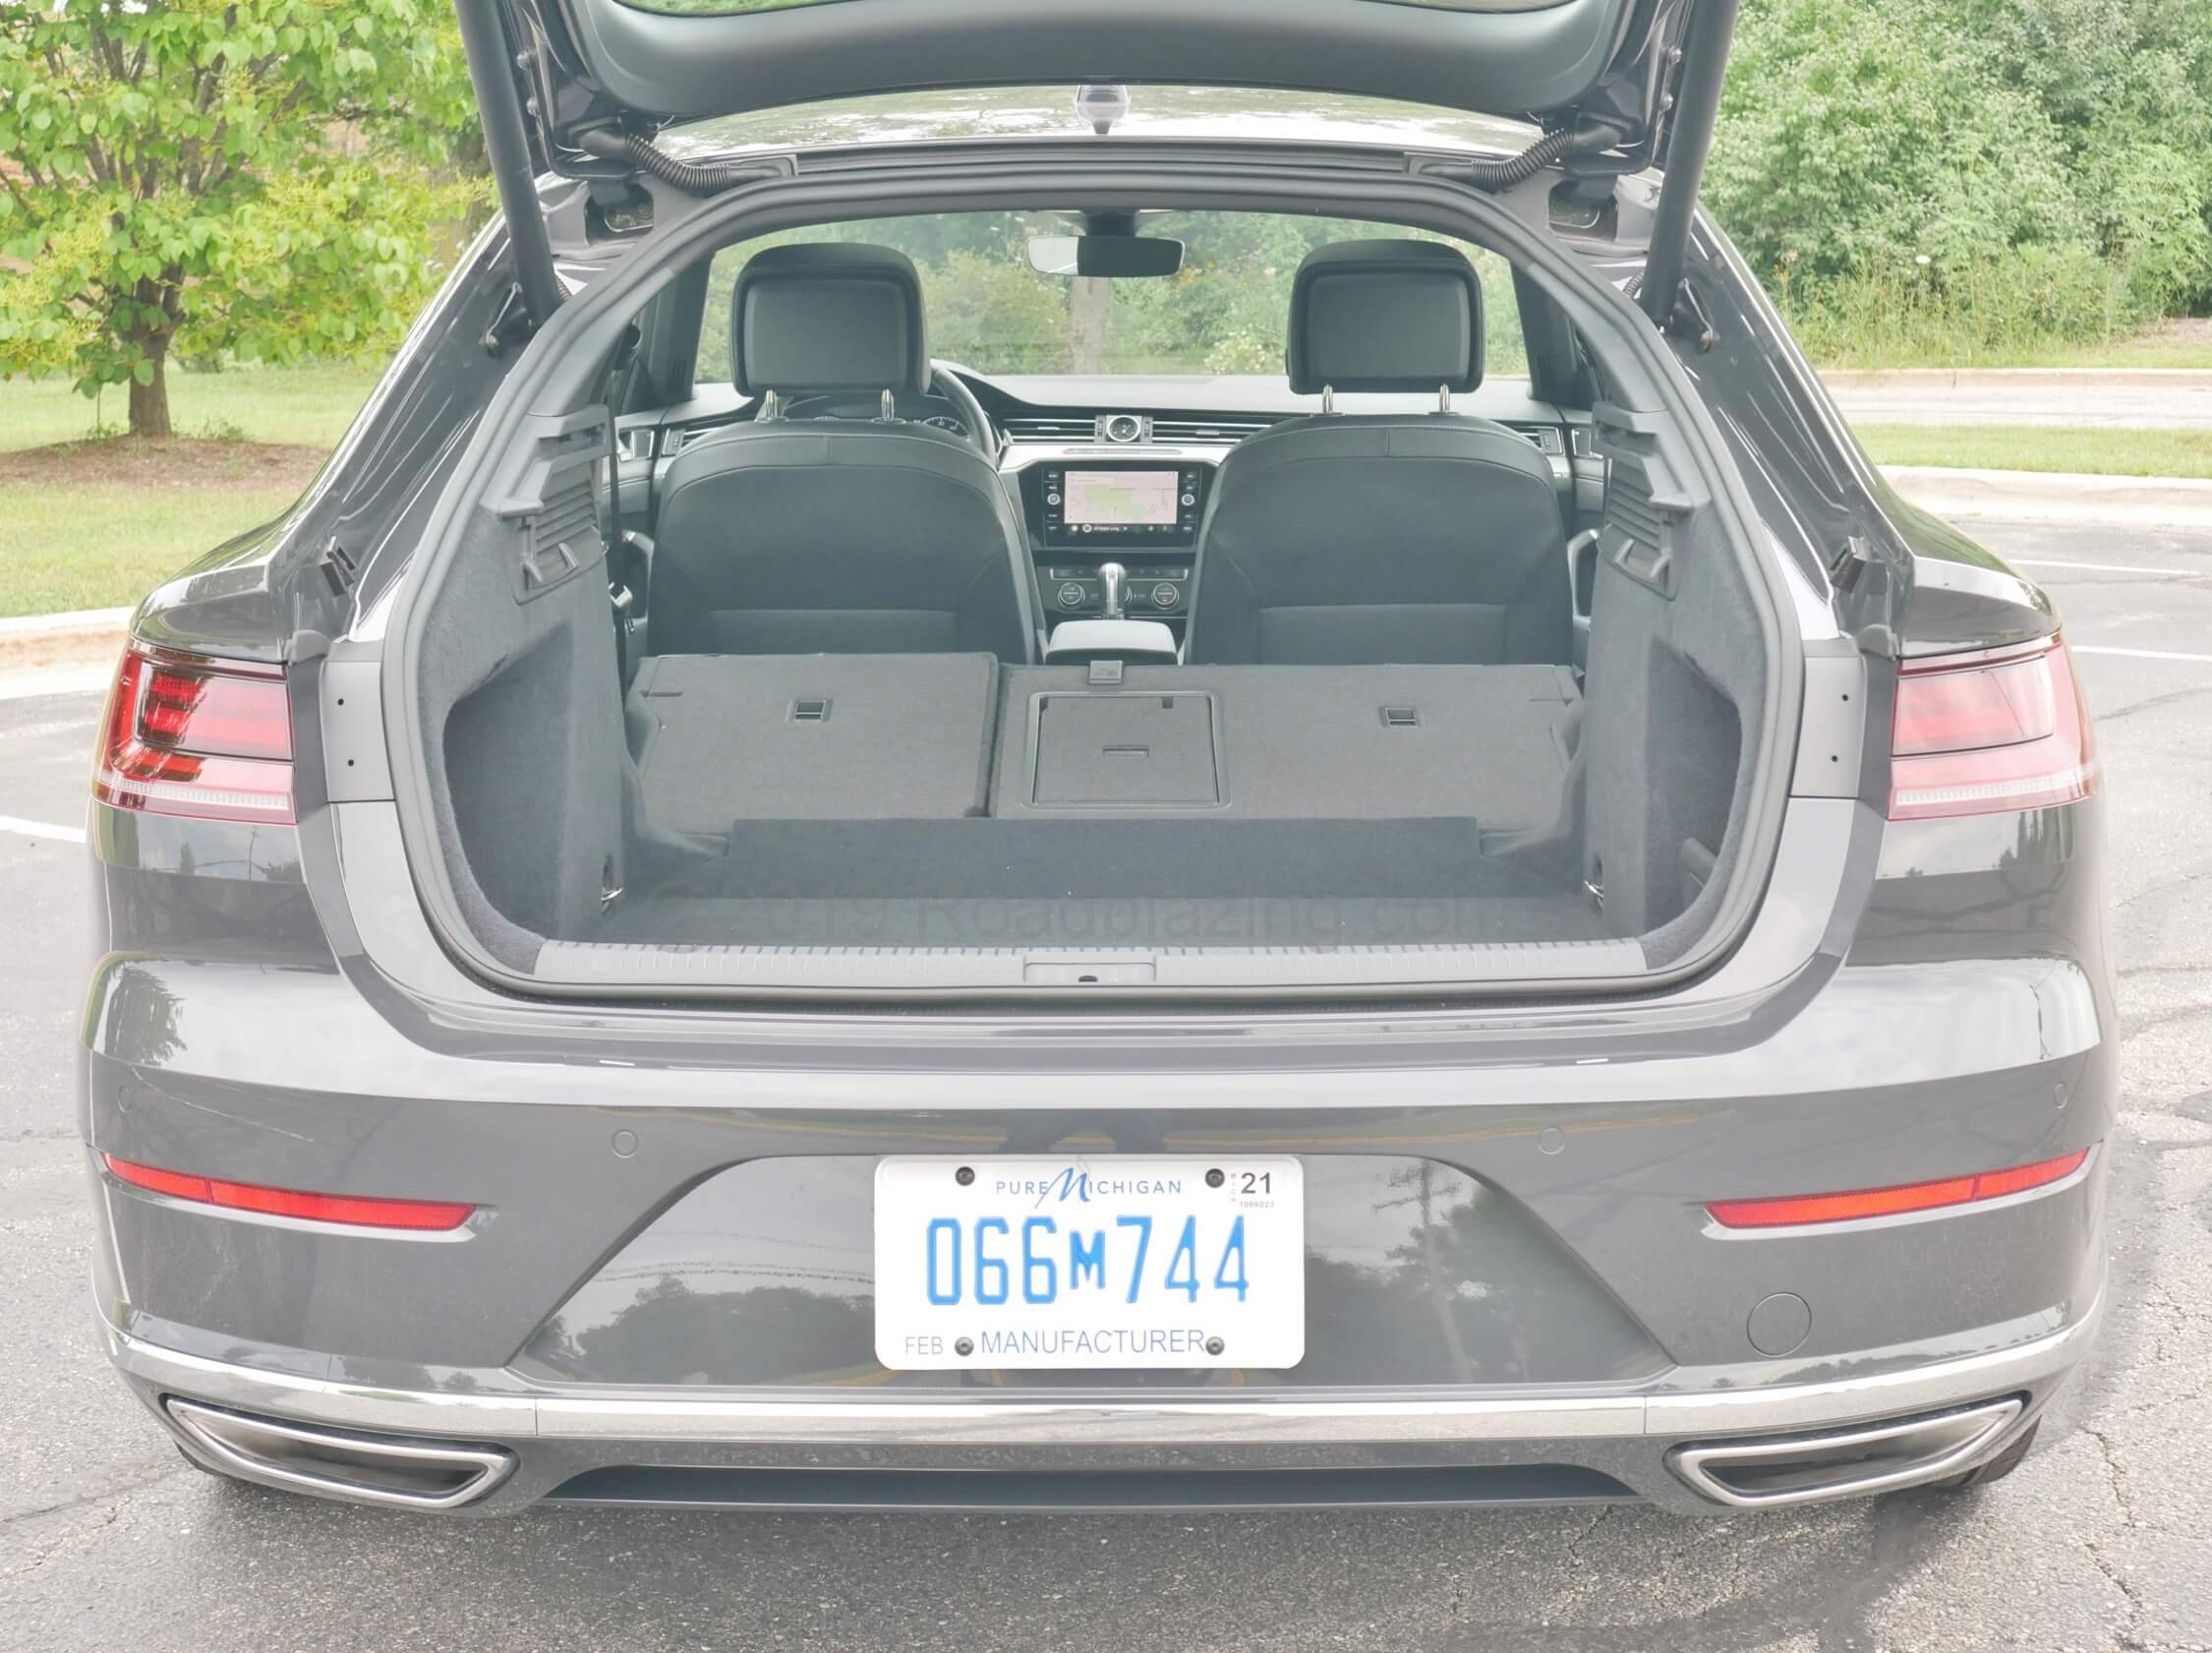 2019 Volkswagen Arteon SEL Premium R-Line 4Motion: Liftback's ginormous expandable cargo bay is clear advantage over traditional notchback GT